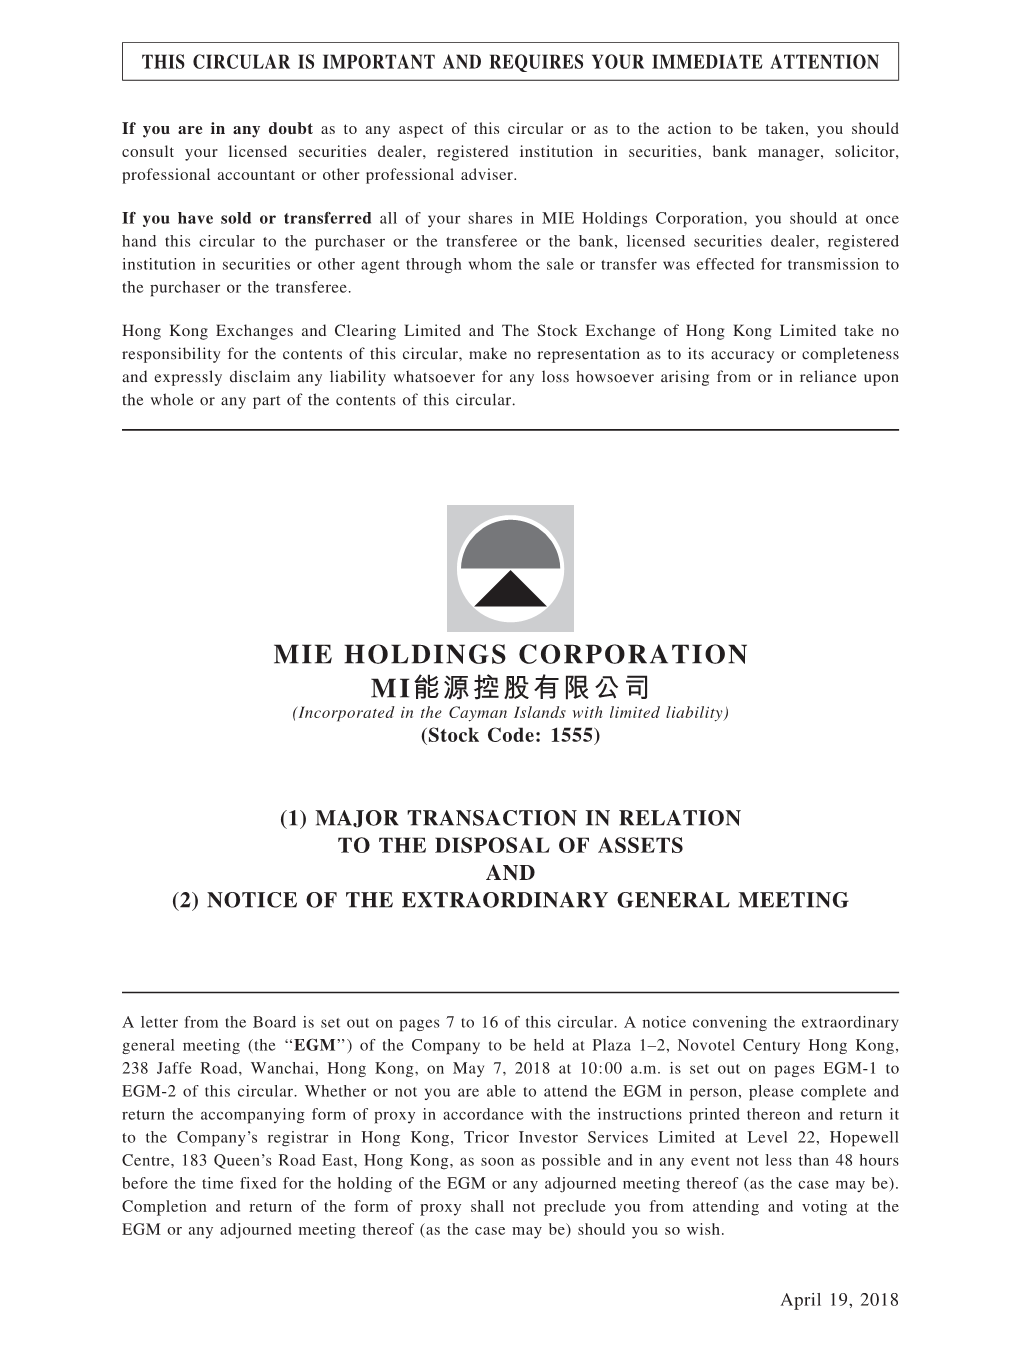 MIE HOLDINGS CORPORATION MI能源控股有限公司 (Incorporated in the Cayman Islands with Limited Liability) (Stock Code: 1555)